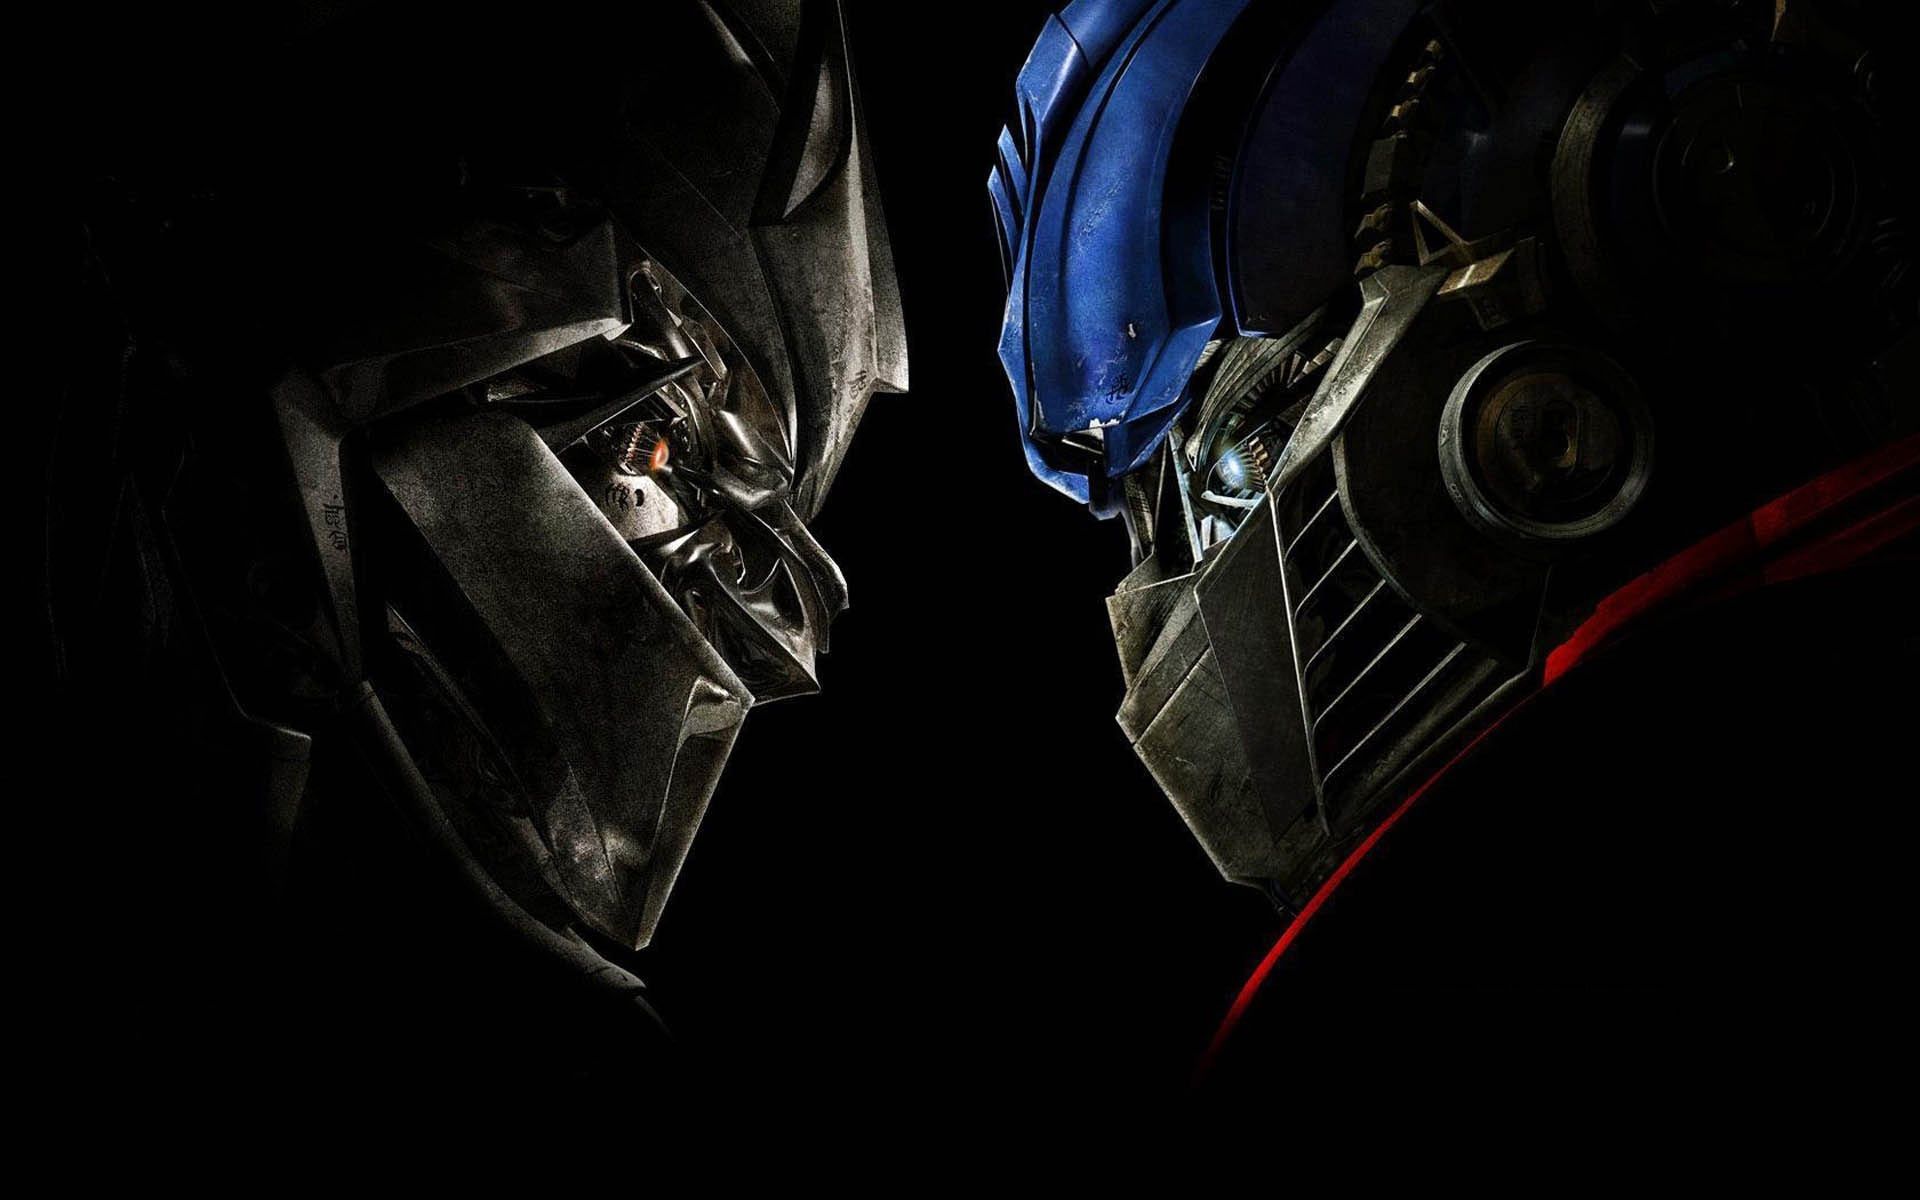 Transformers wallpapers